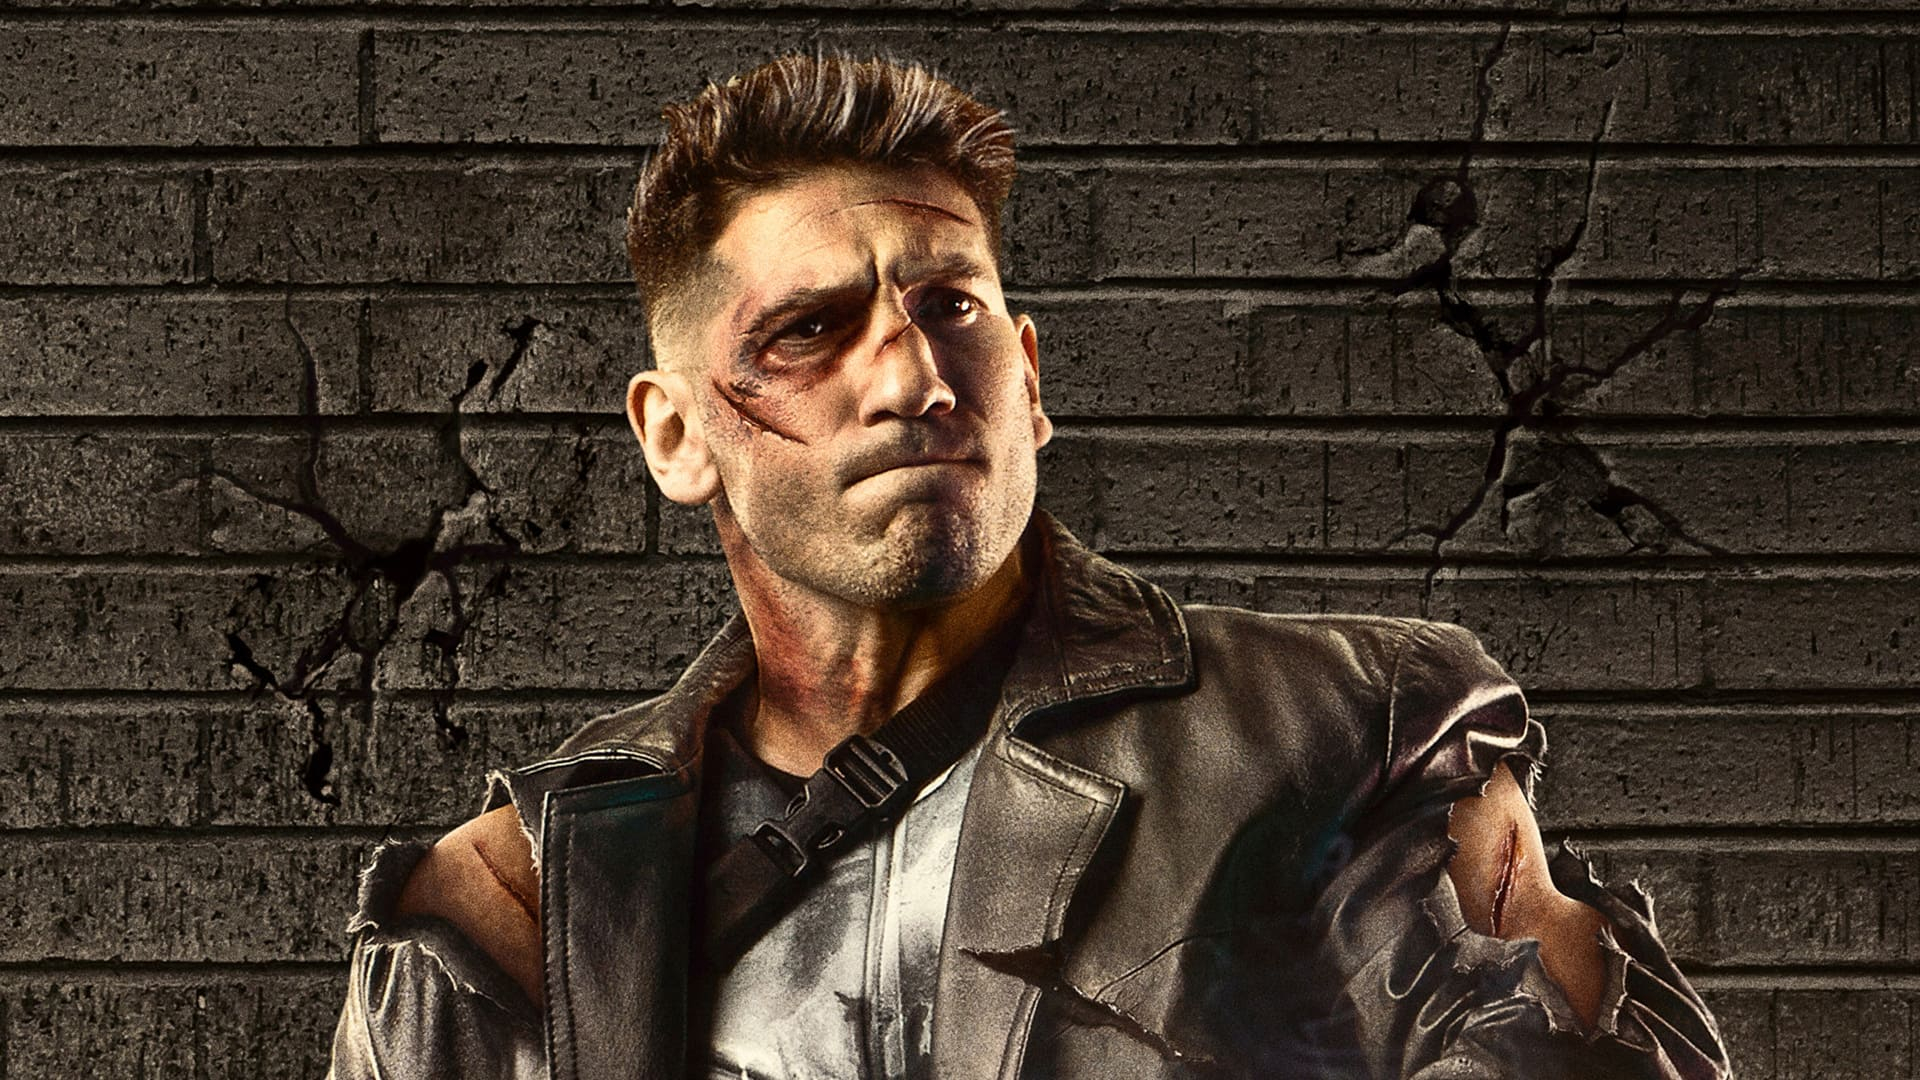 1920x1080 The Punisher Wallpapers Top 30 Best The Punisher Backgrounds Download